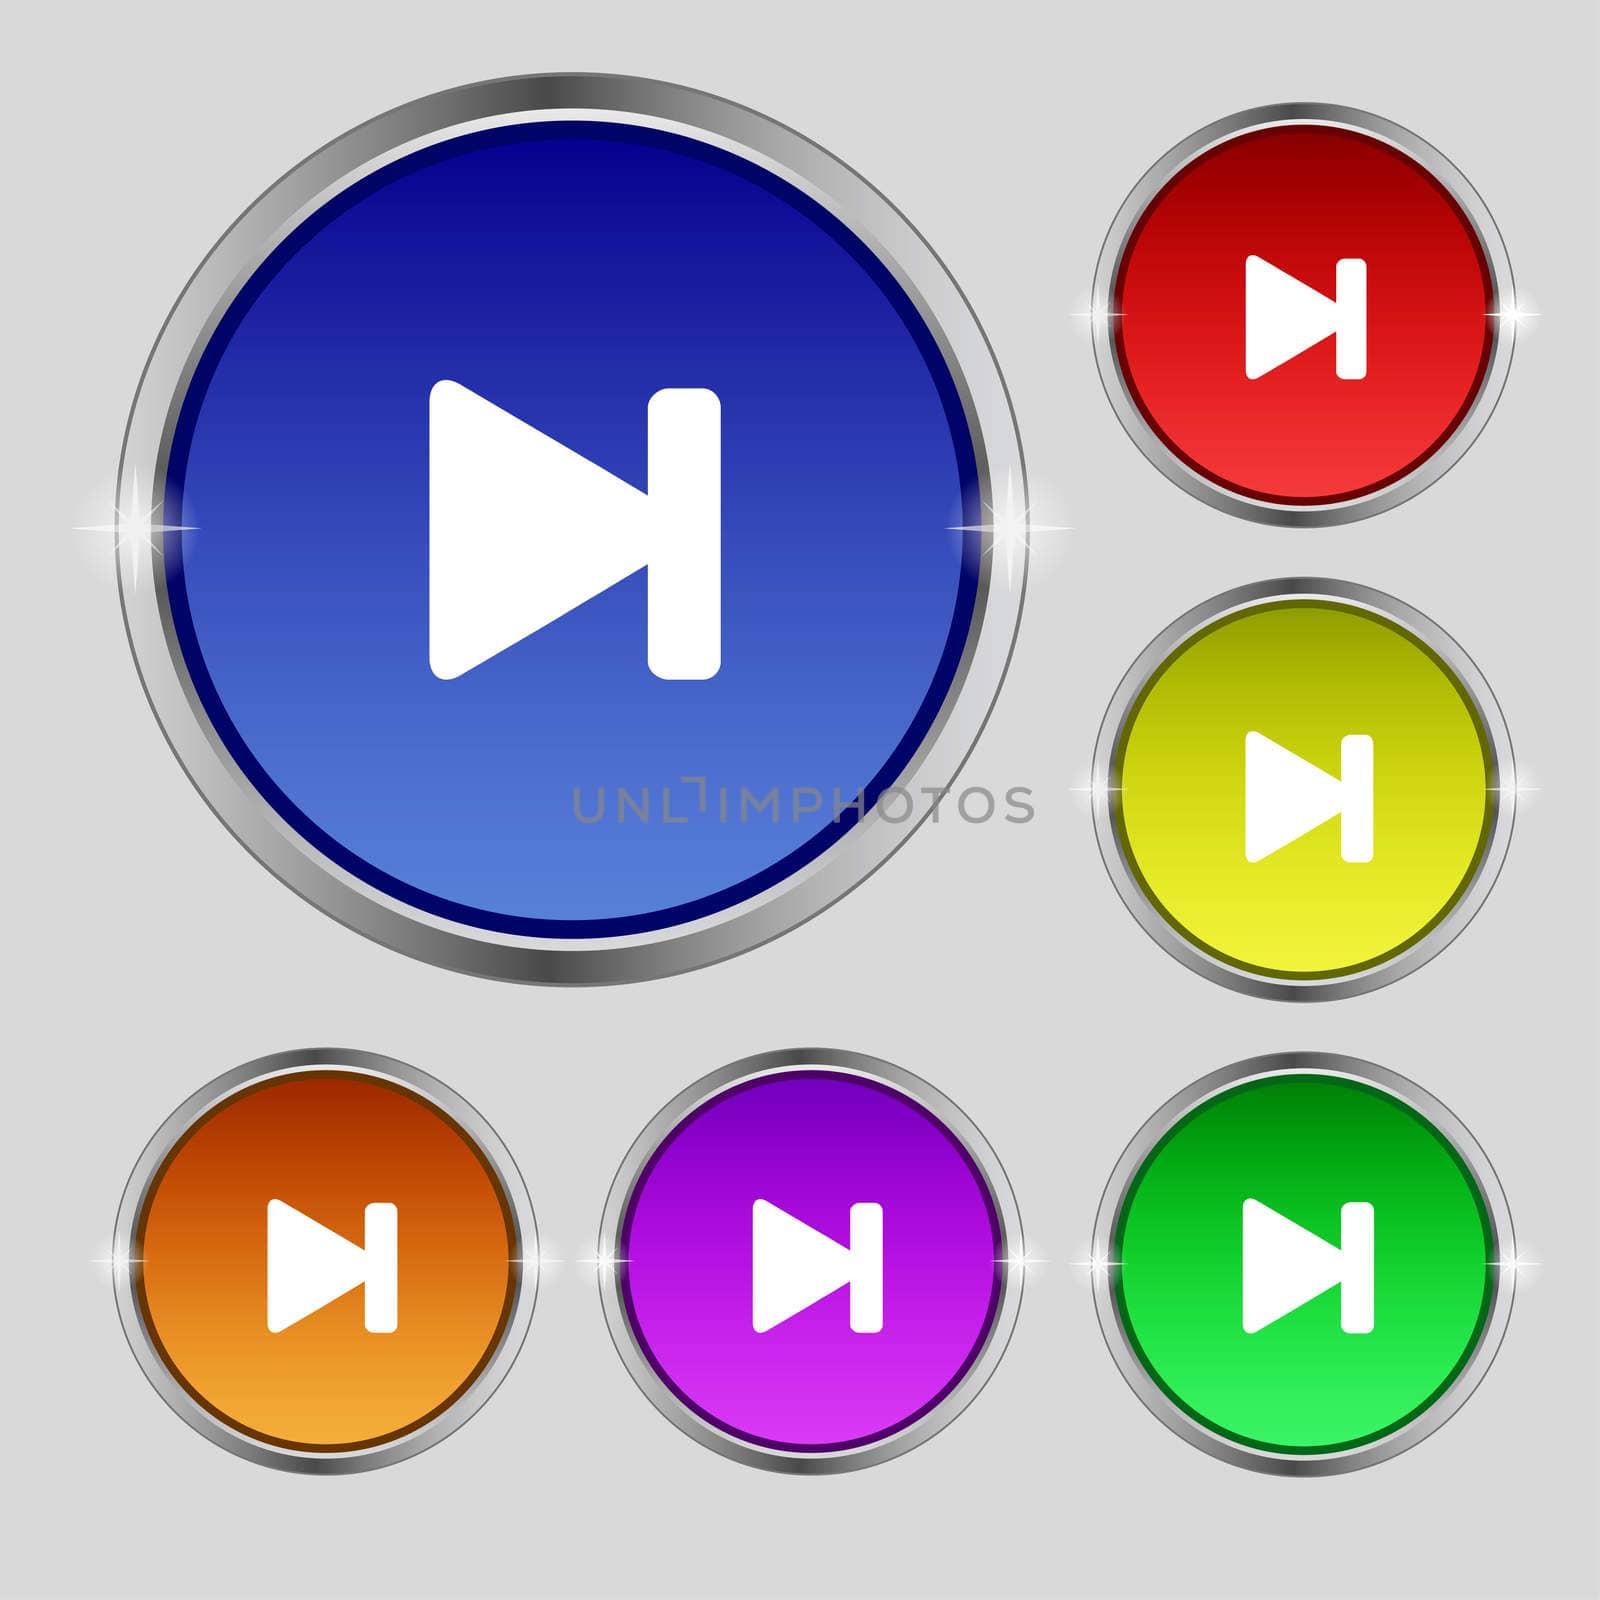 next track icon sign. Round symbol on bright colourful buttons. illustration